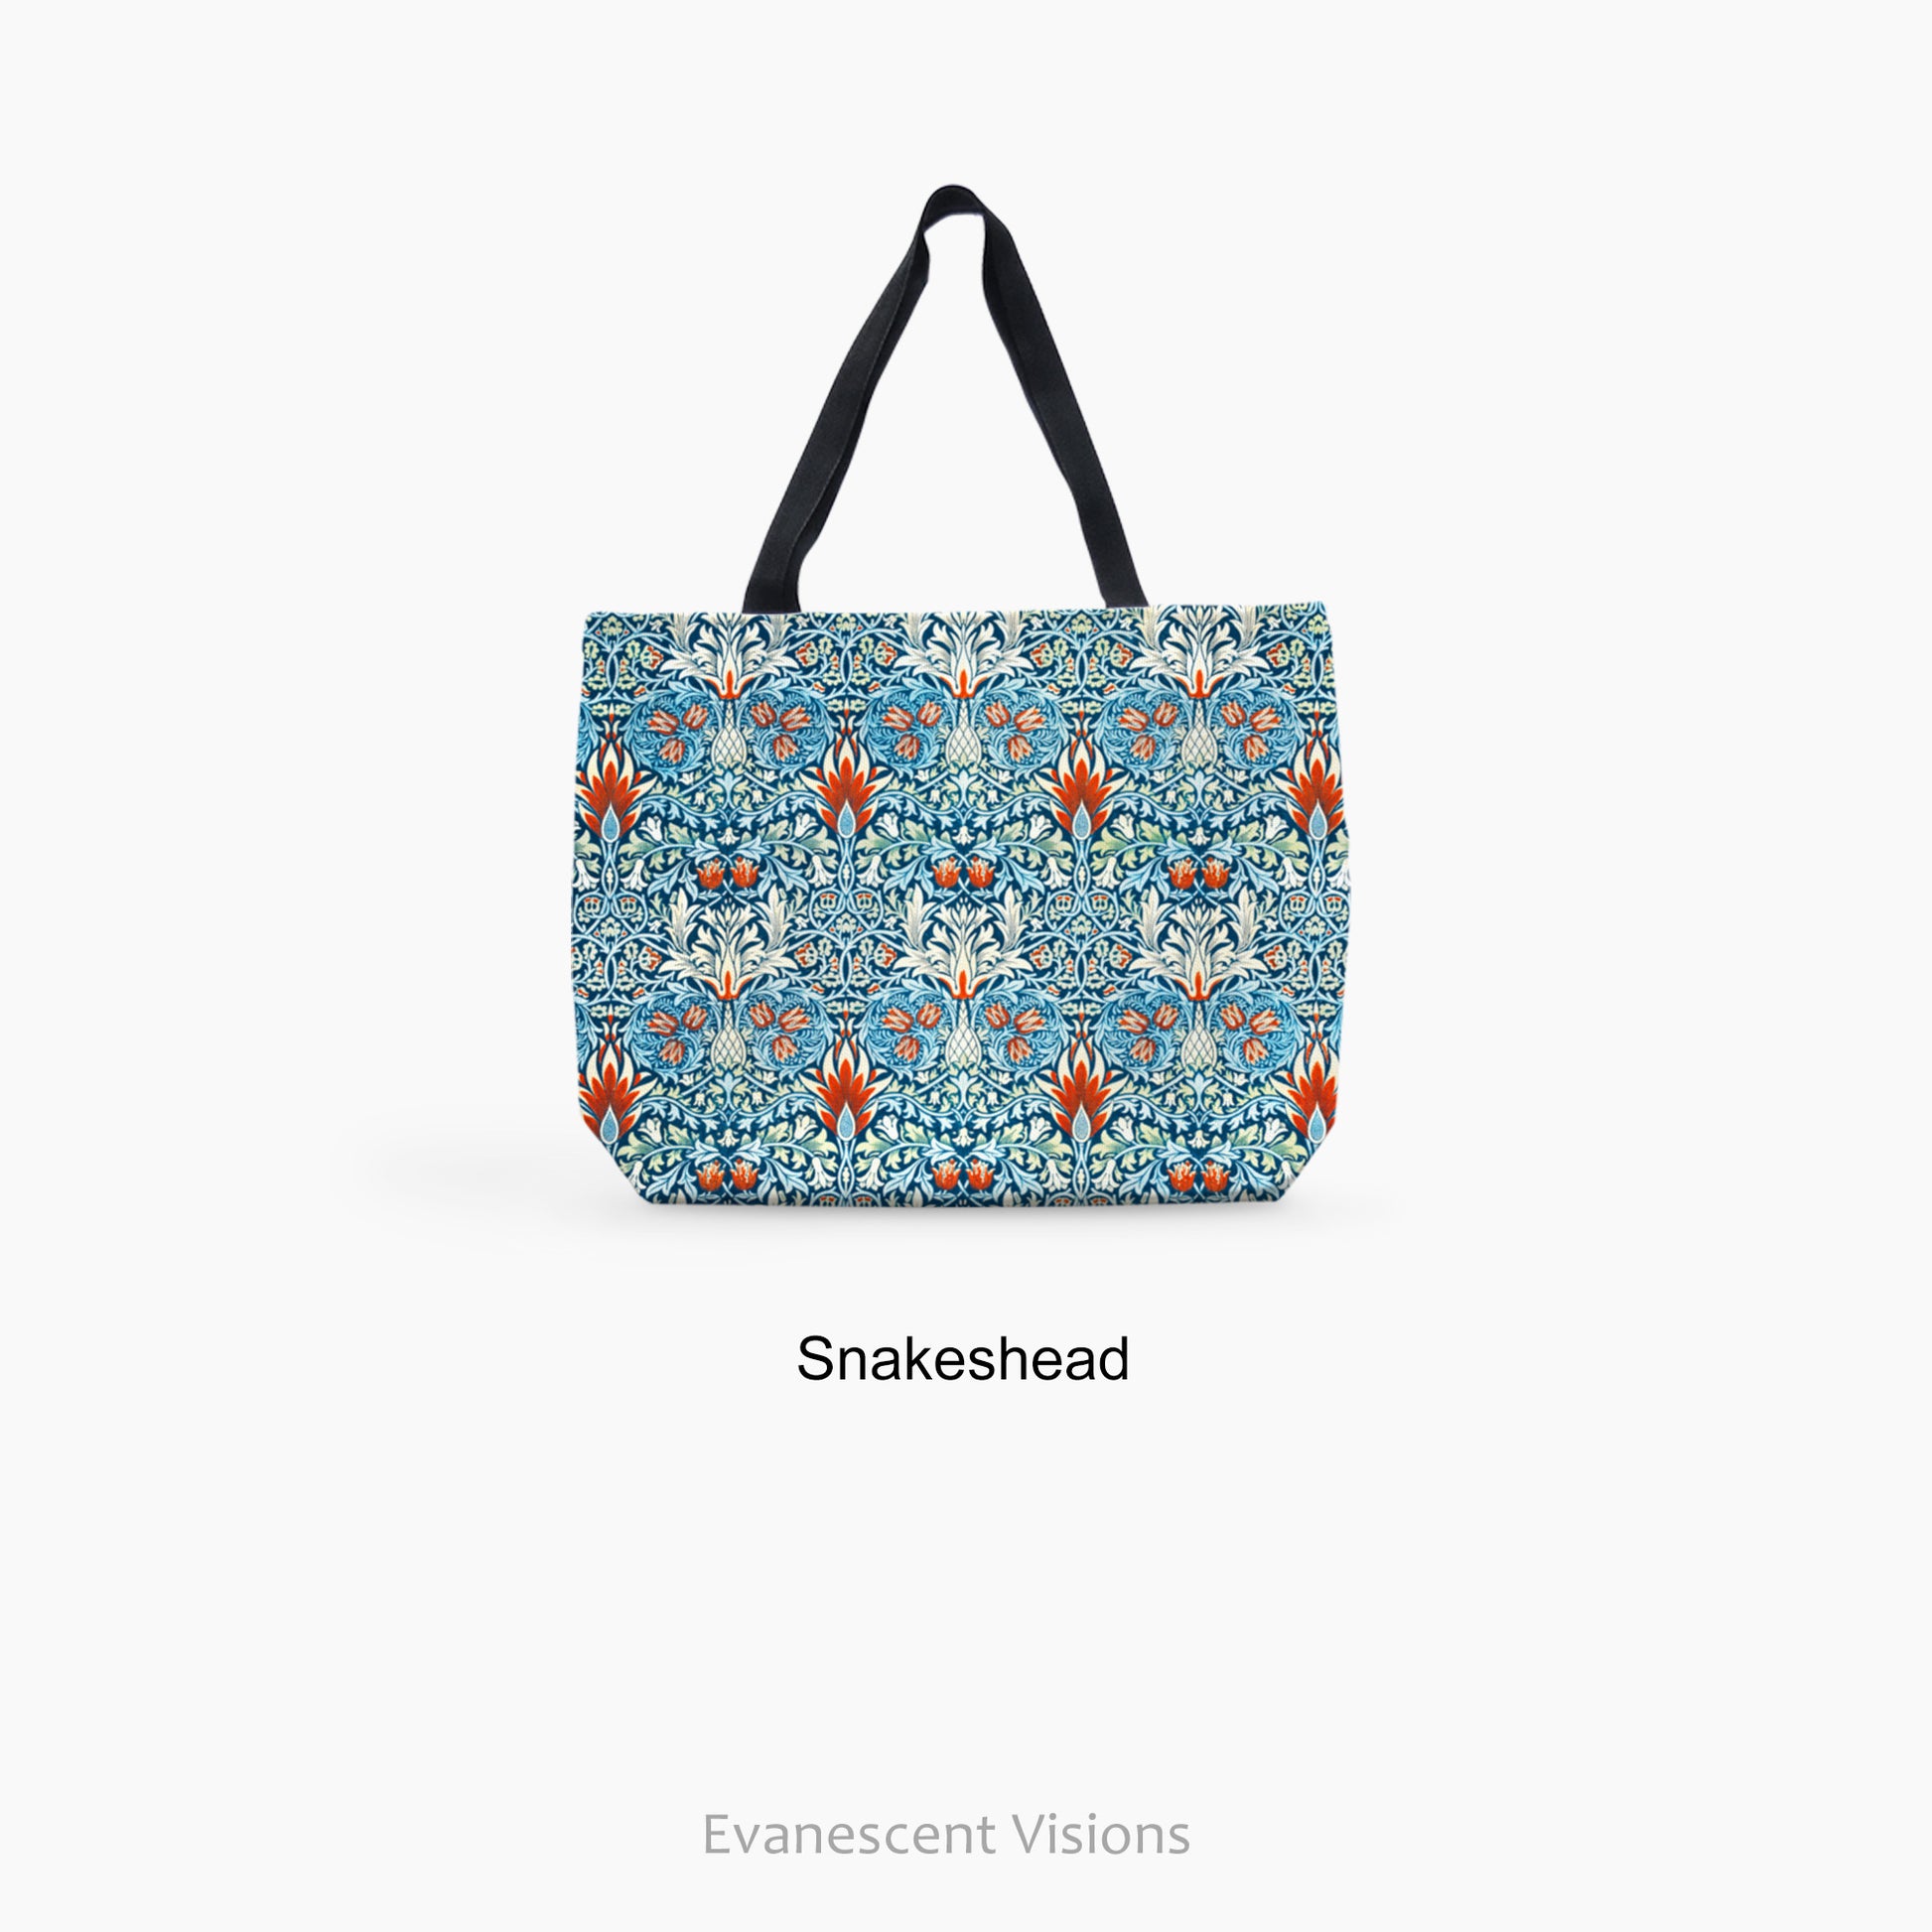 William Morris Patterned Large Tote Bag with the Snakeshead design option